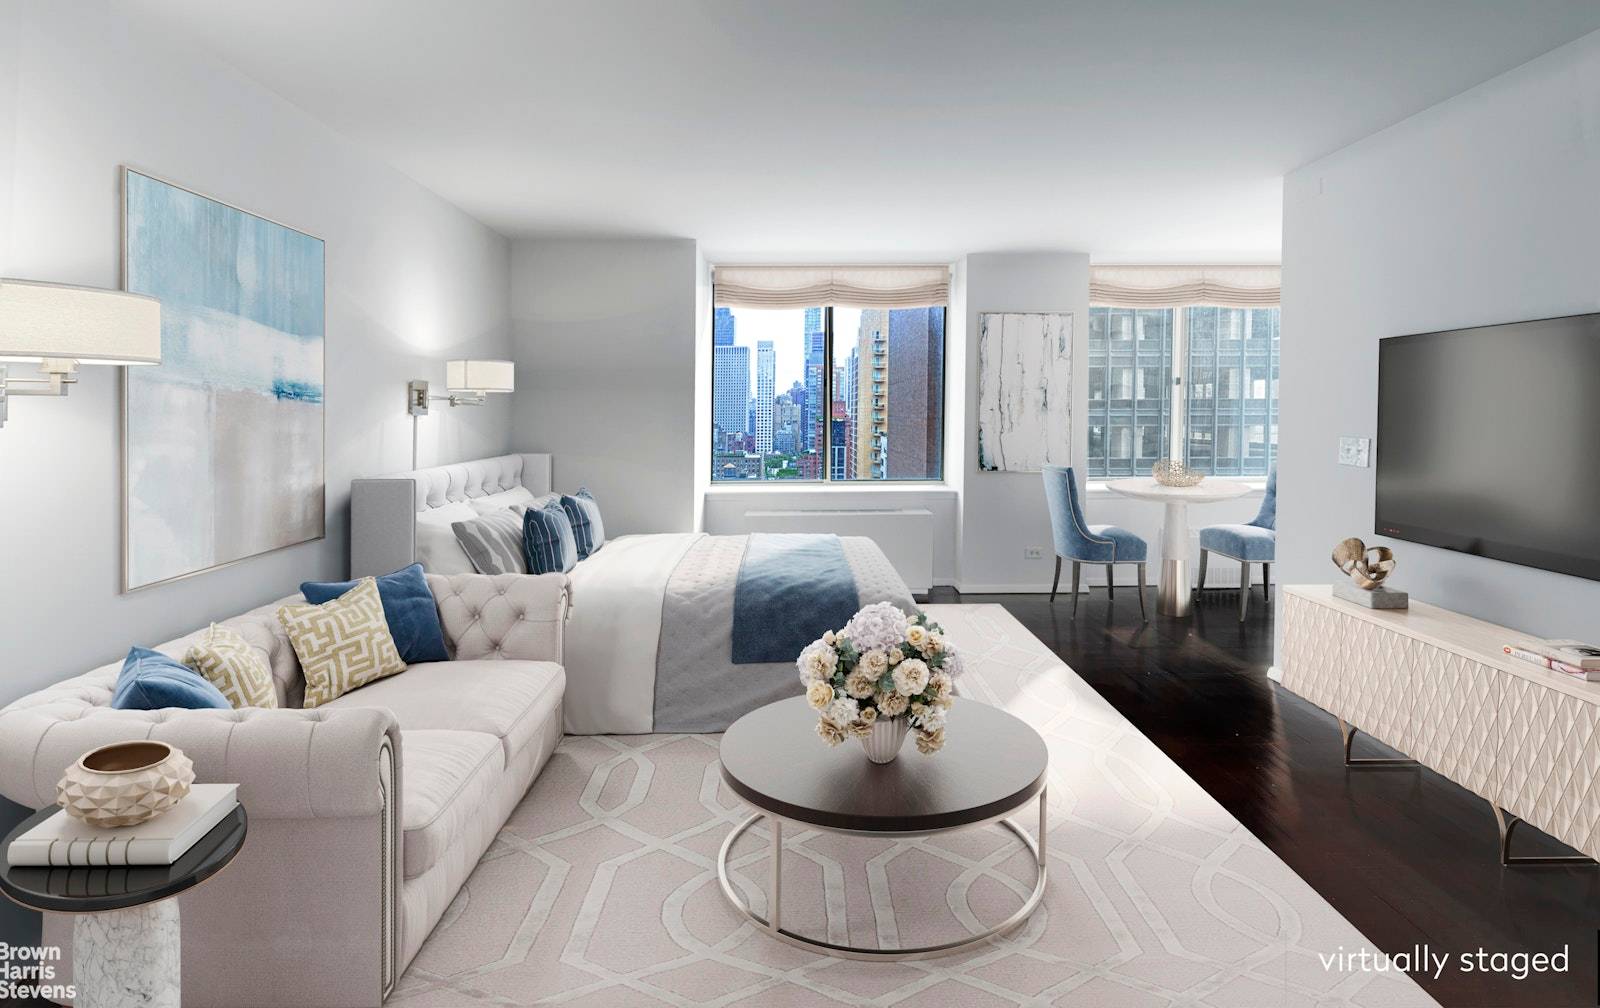 A pretty studio located in the club at Turtle Bay Condominium on East 47th Street.